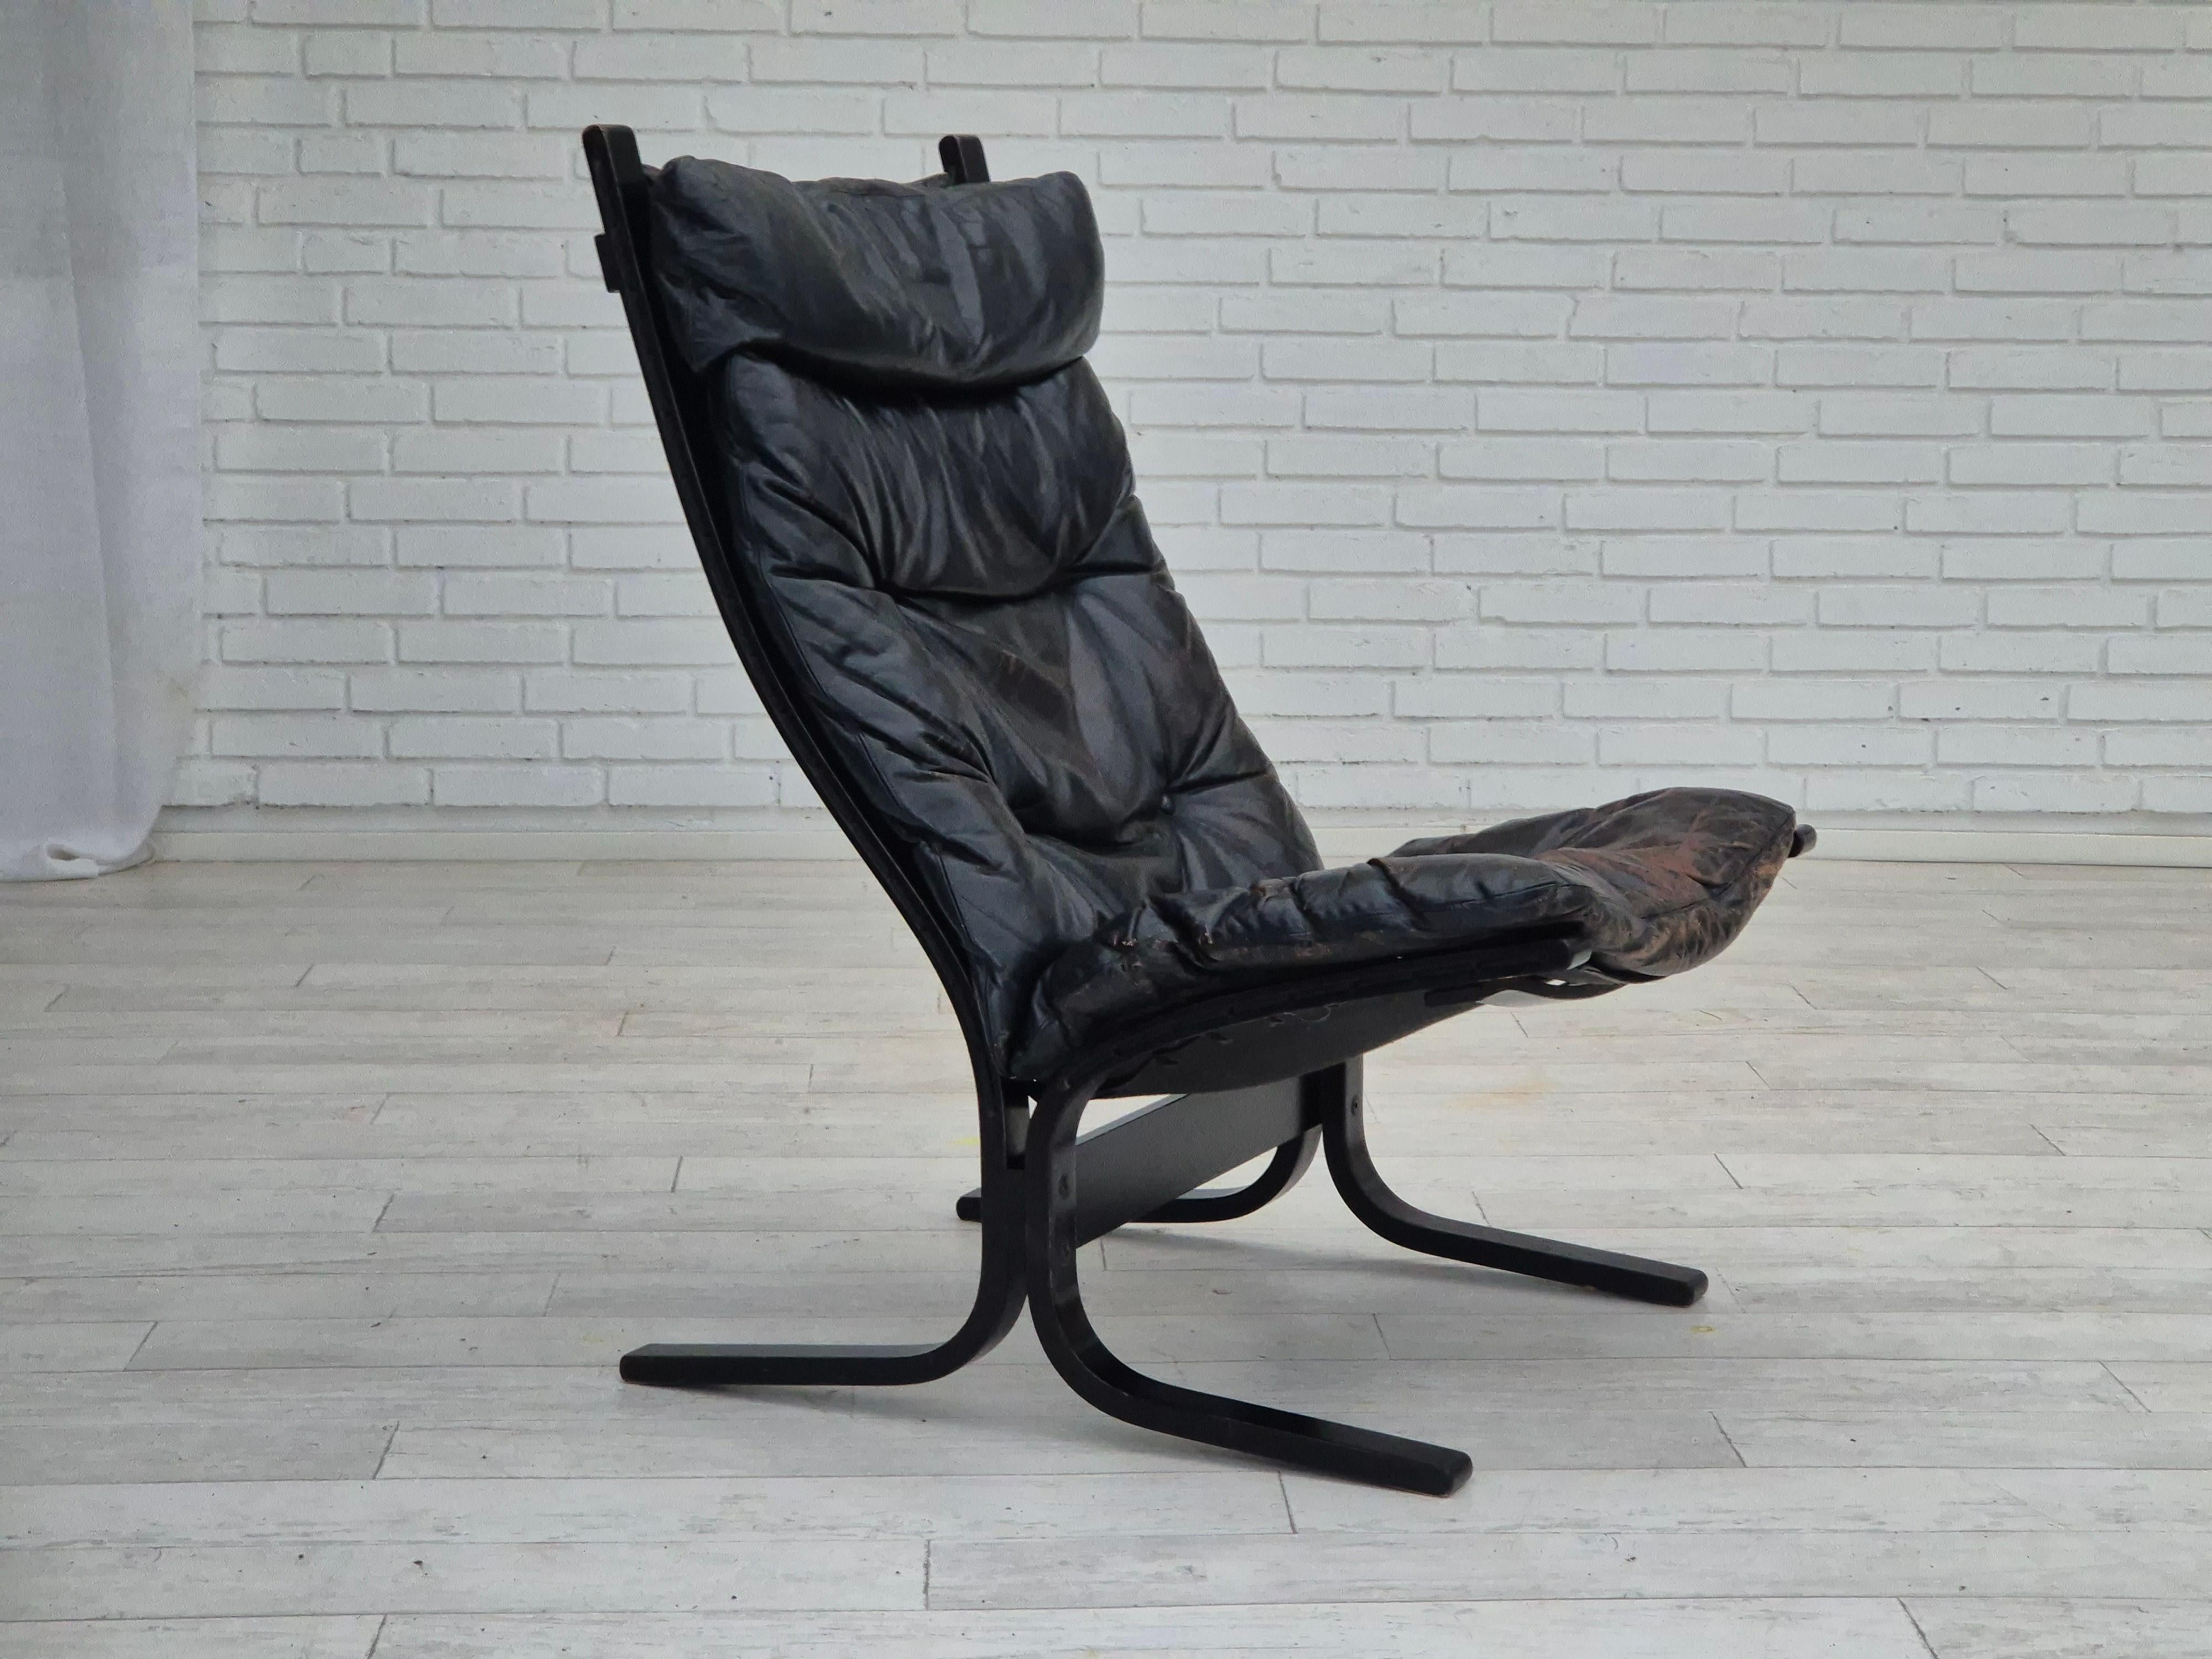 1970s, Norwegian design, relax chair model 'Siesta' by Ingmar Relling for Westnofa. Original good condition with nice patina. No smells and no stains. Black leather, canvas, and bent wood.